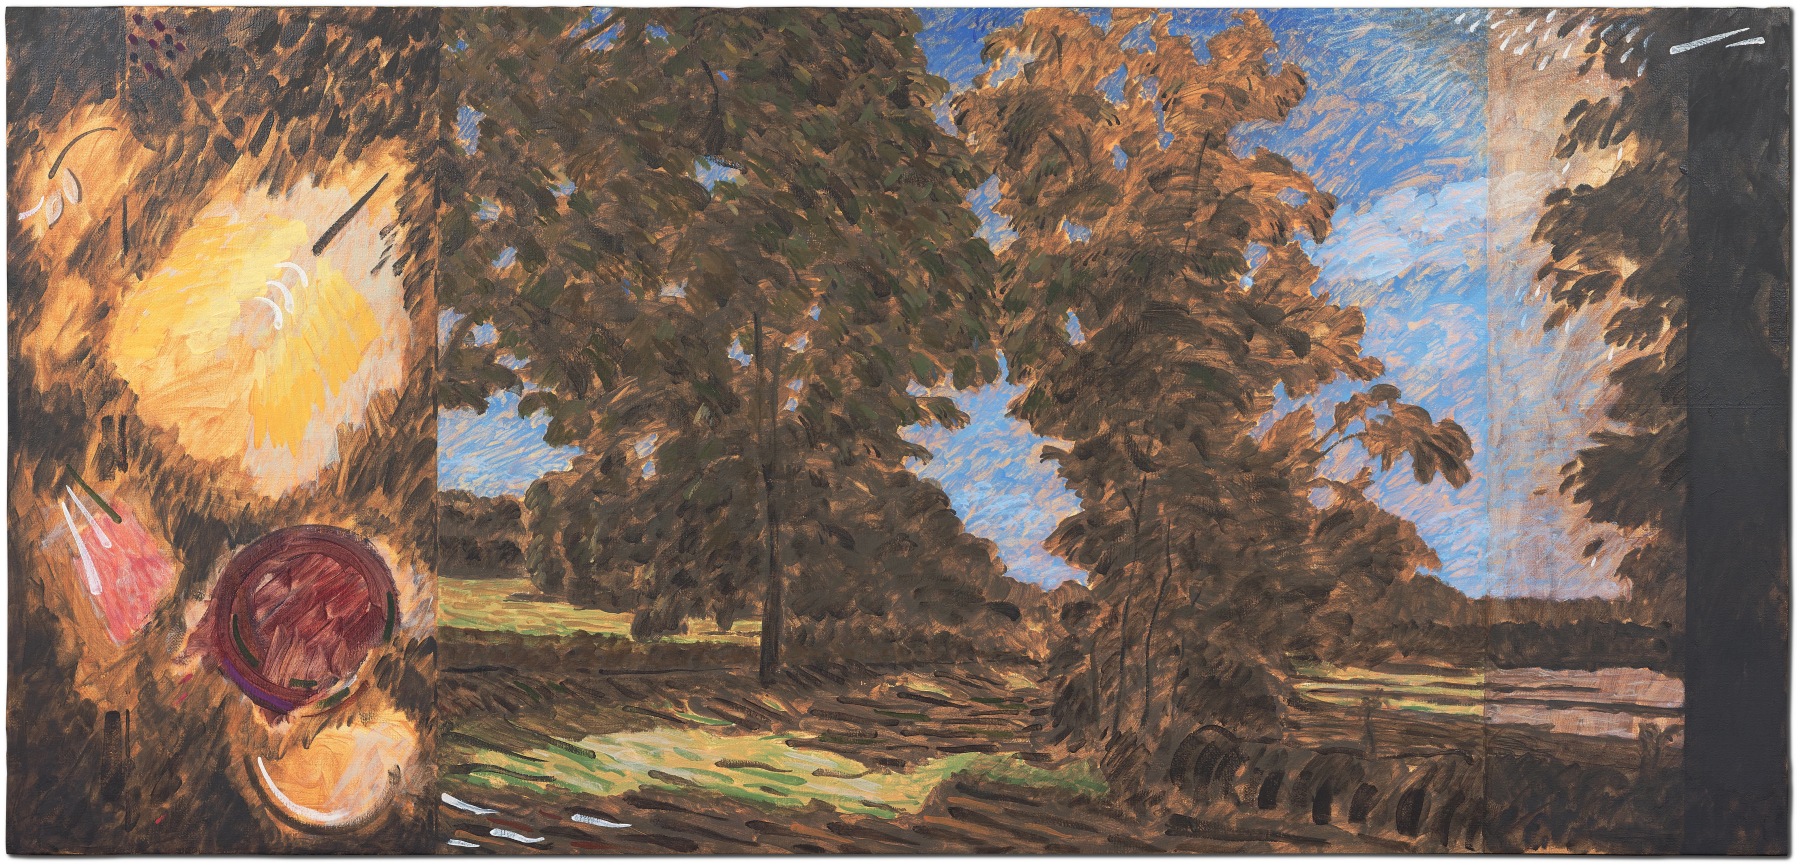 Souvenir of a Land I Almost Knew

Oil on canvas 47 x 99&amp;quot; 1994